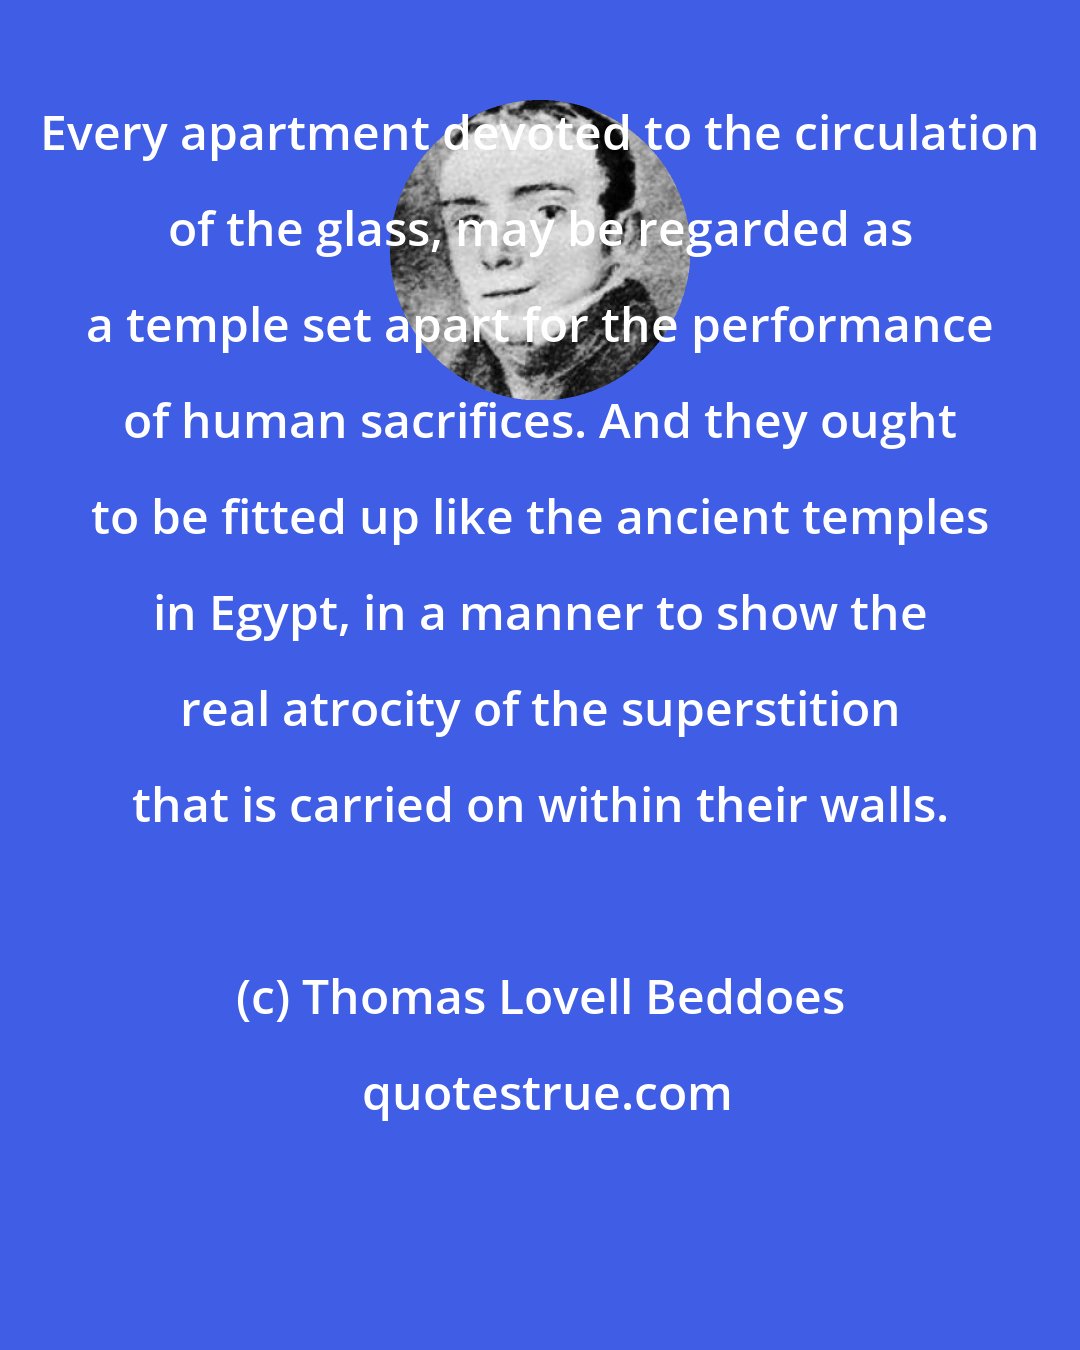 Thomas Lovell Beddoes: Every apartment devoted to the circulation of the glass, may be regarded as a temple set apart for the performance of human sacrifices. And they ought to be fitted up like the ancient temples in Egypt, in a manner to show the real atrocity of the superstition that is carried on within their walls.